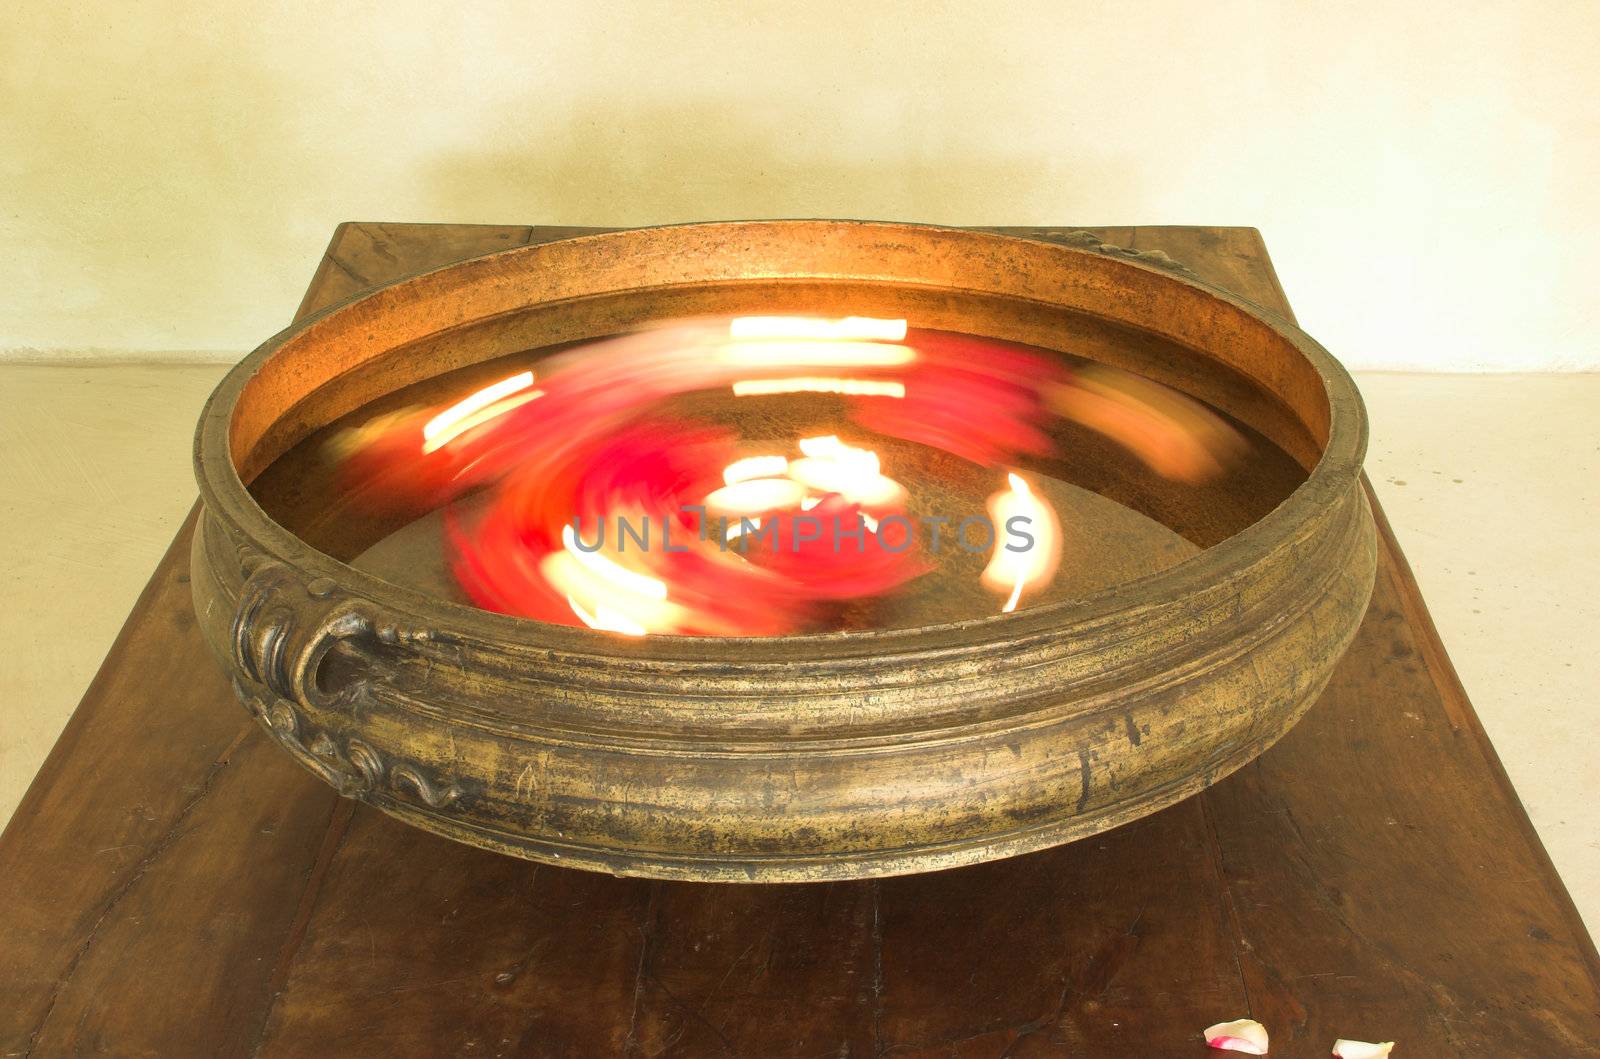 Traditional Indian urli brass bowl with blurred flowers and candles moving rotating inside